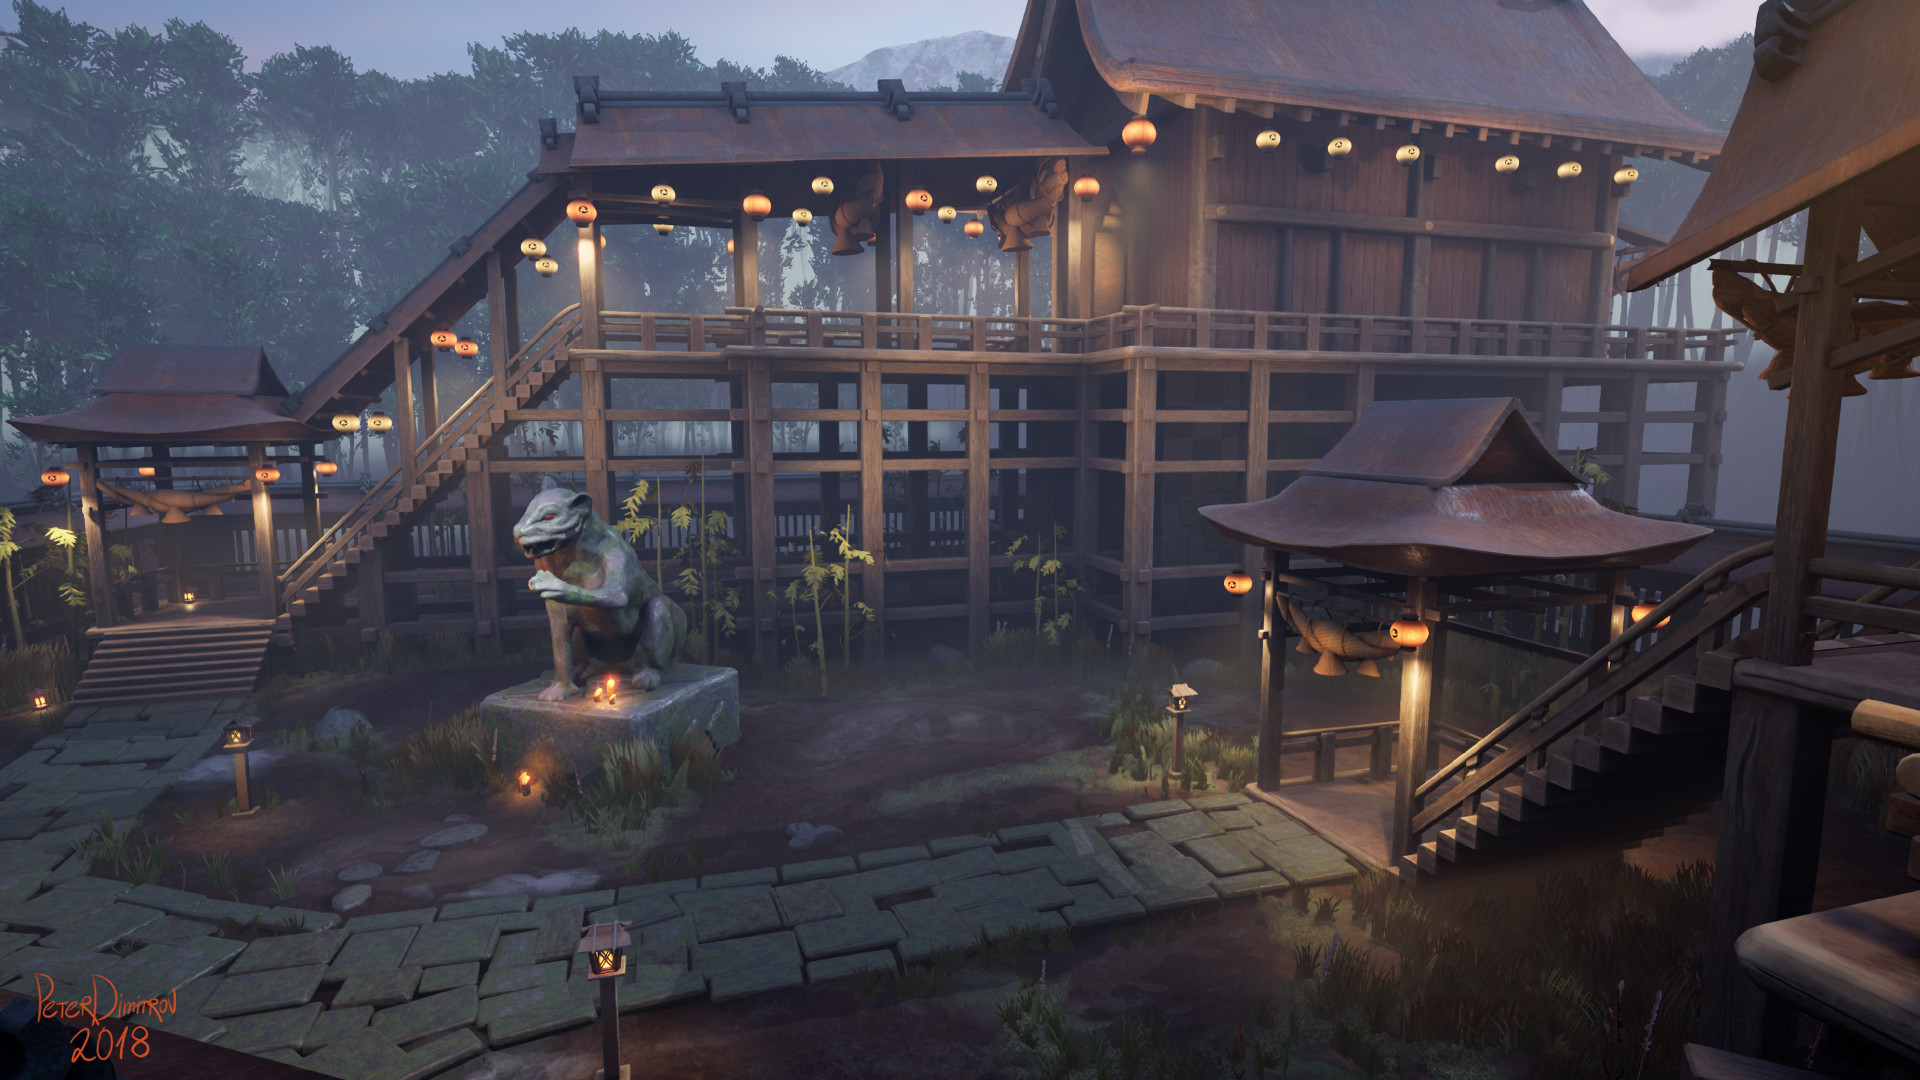 Screenshot overlooking the second vertical level of the scene, right after getting past the stone steps. To the left is a square stone cut with a lion statue sitting on top. Behind it are lots of tiny wooden supports on which sit the main structures of the place.